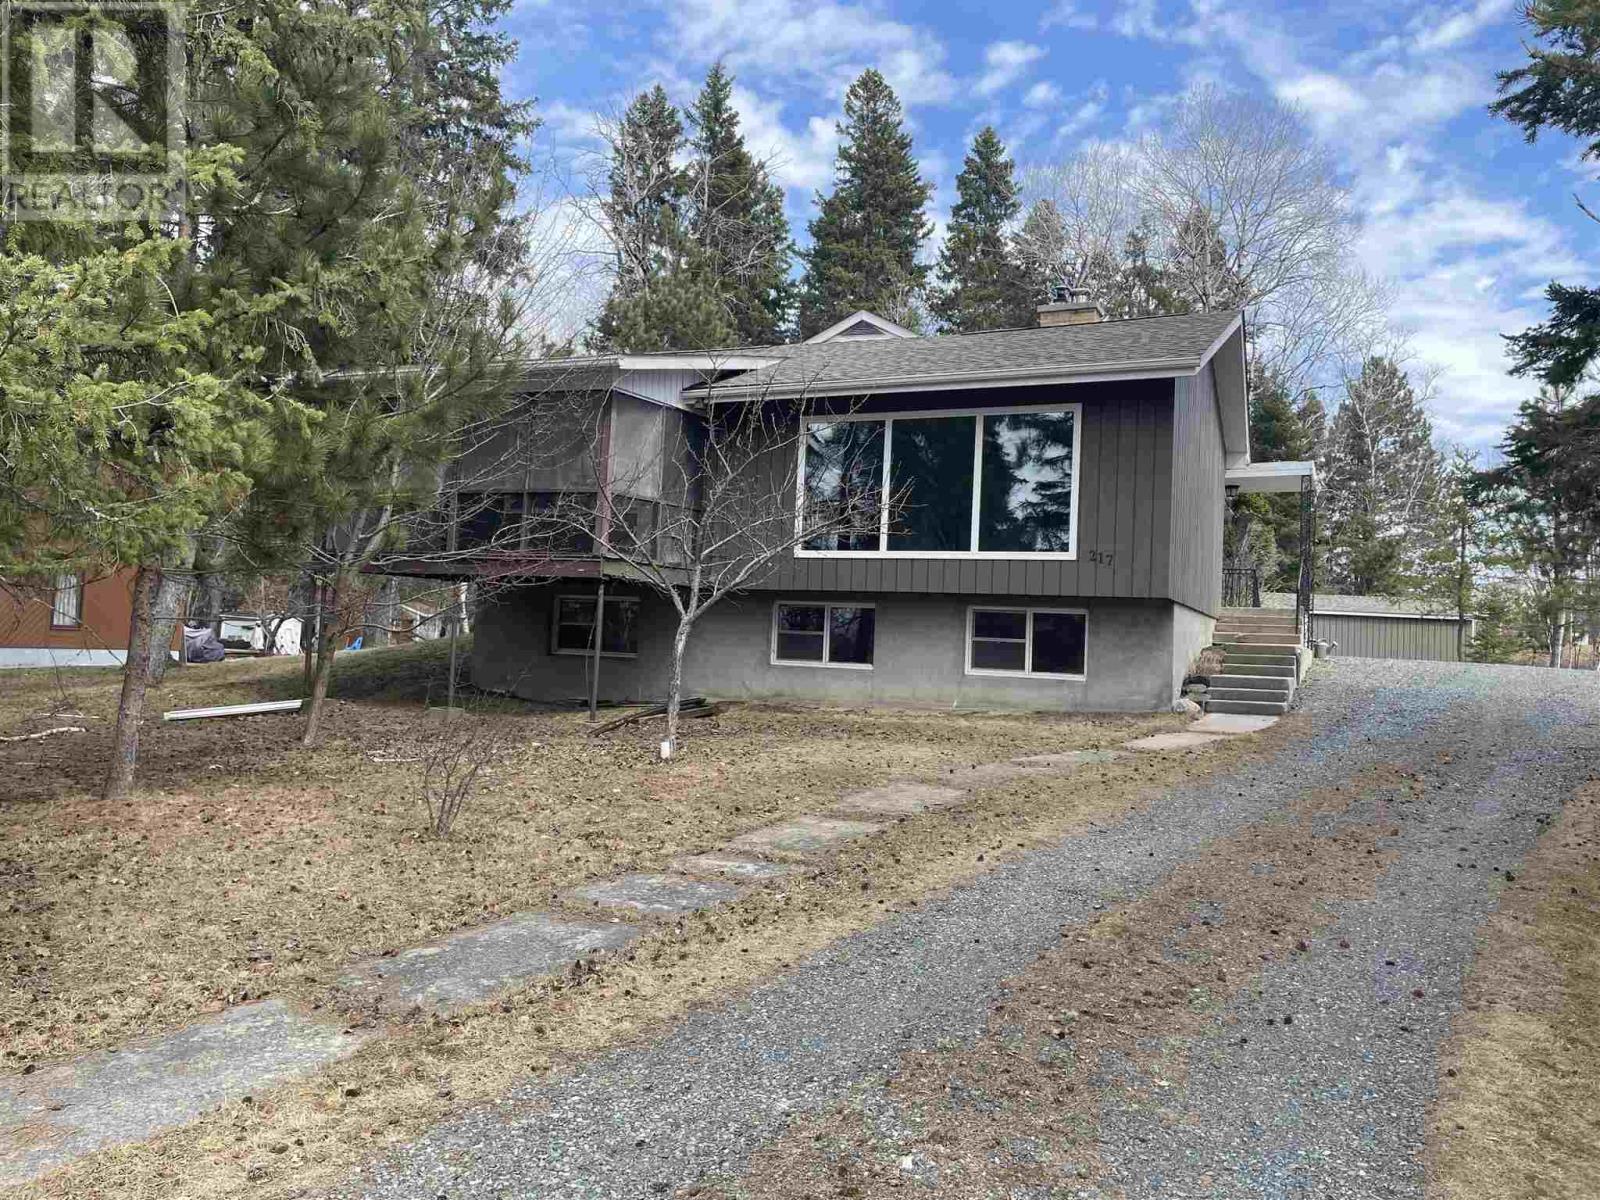 217 Riverview DR located in Dryden, Ontario